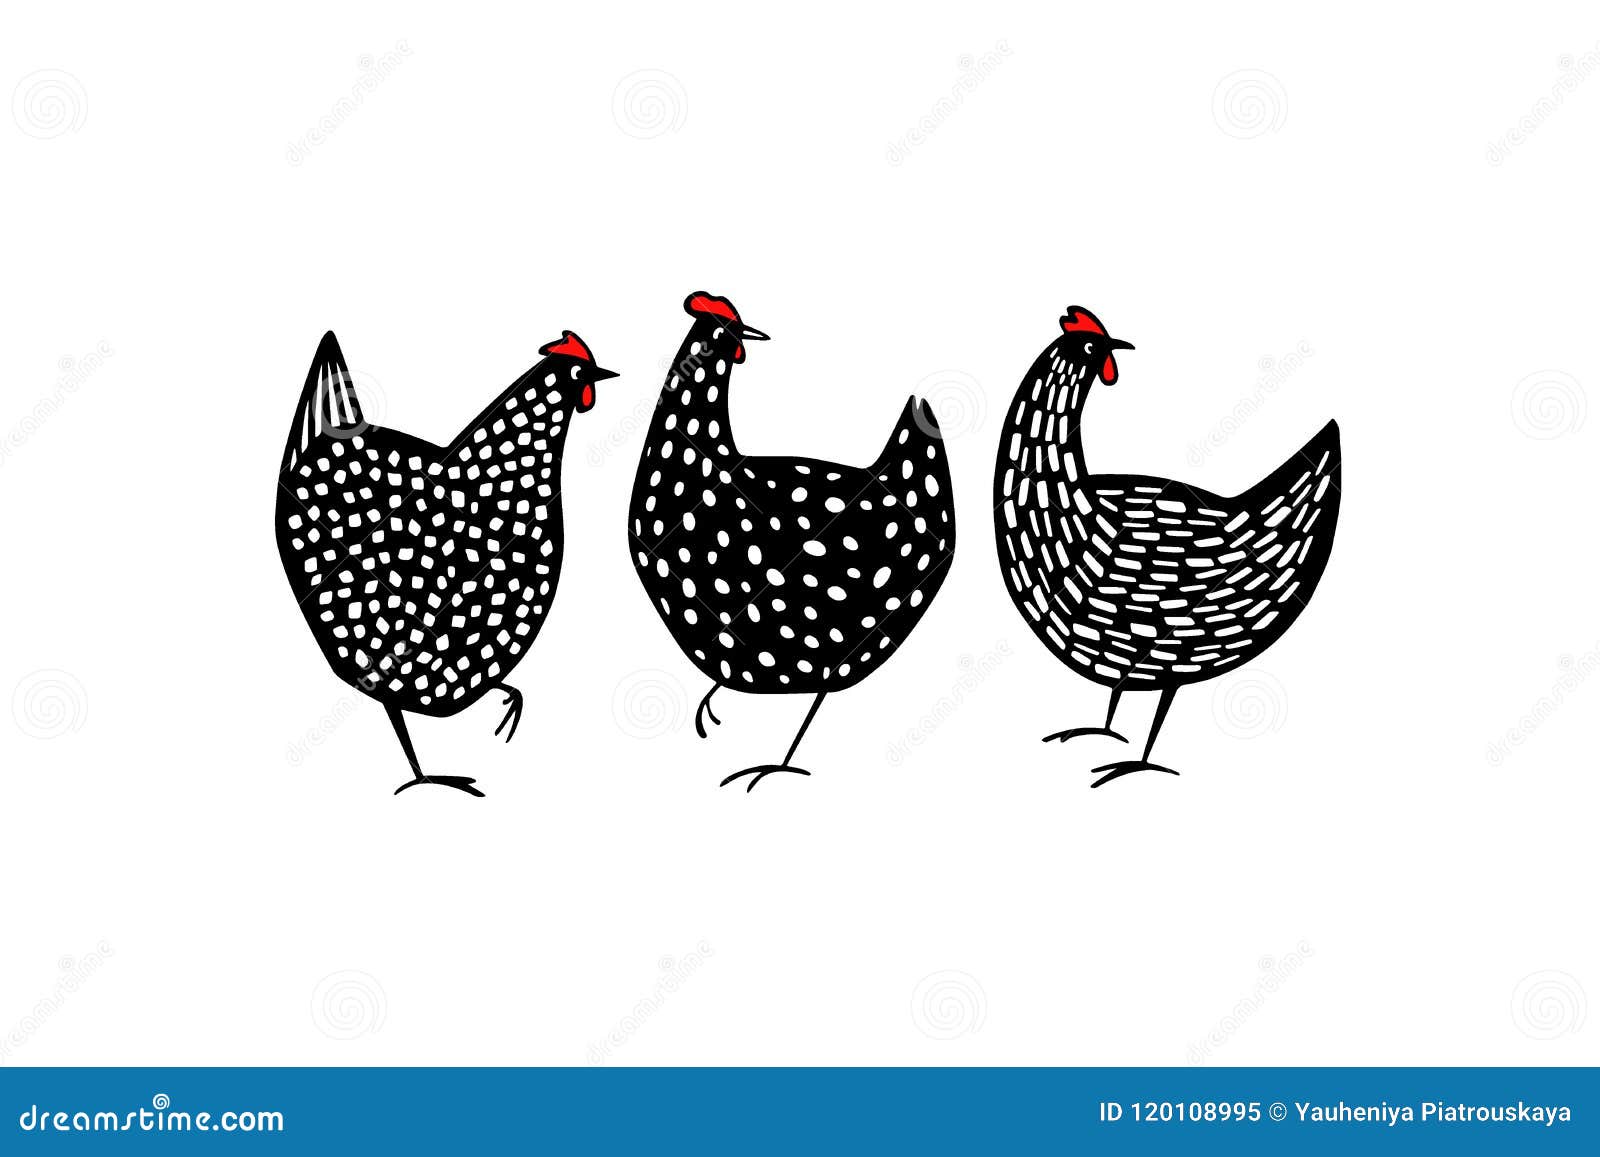 Hand drawn speckled hens stock vector. Illustration of icon - 120108995